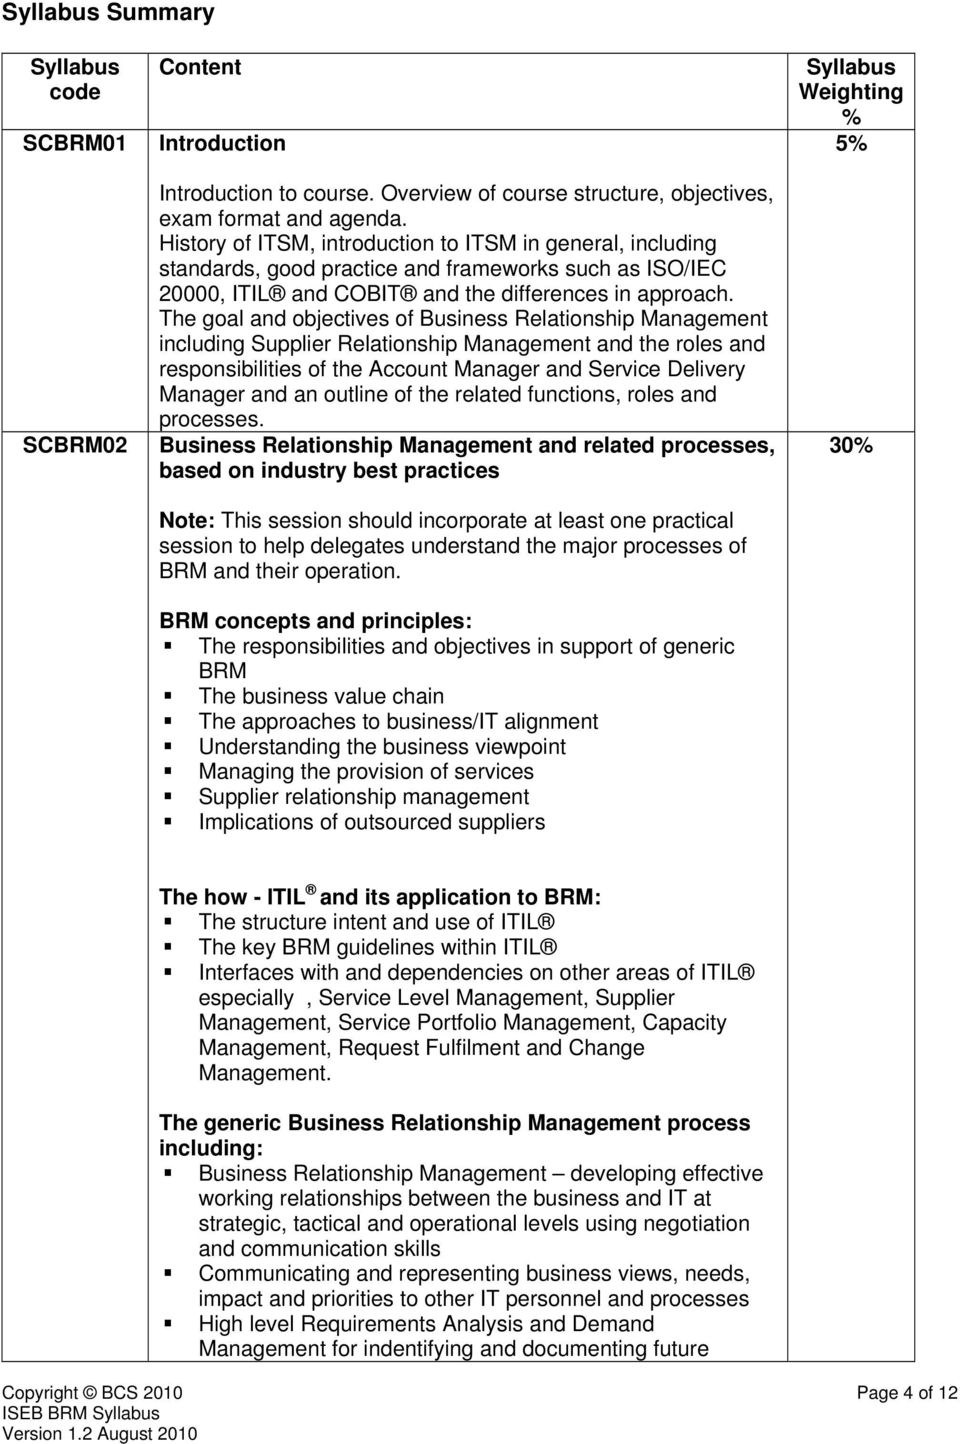 The goal and objectives of Business Relationship Management including Supplier Relationship Management and the roles and responsibilities of the Account Manager and Service Delivery Manager and an